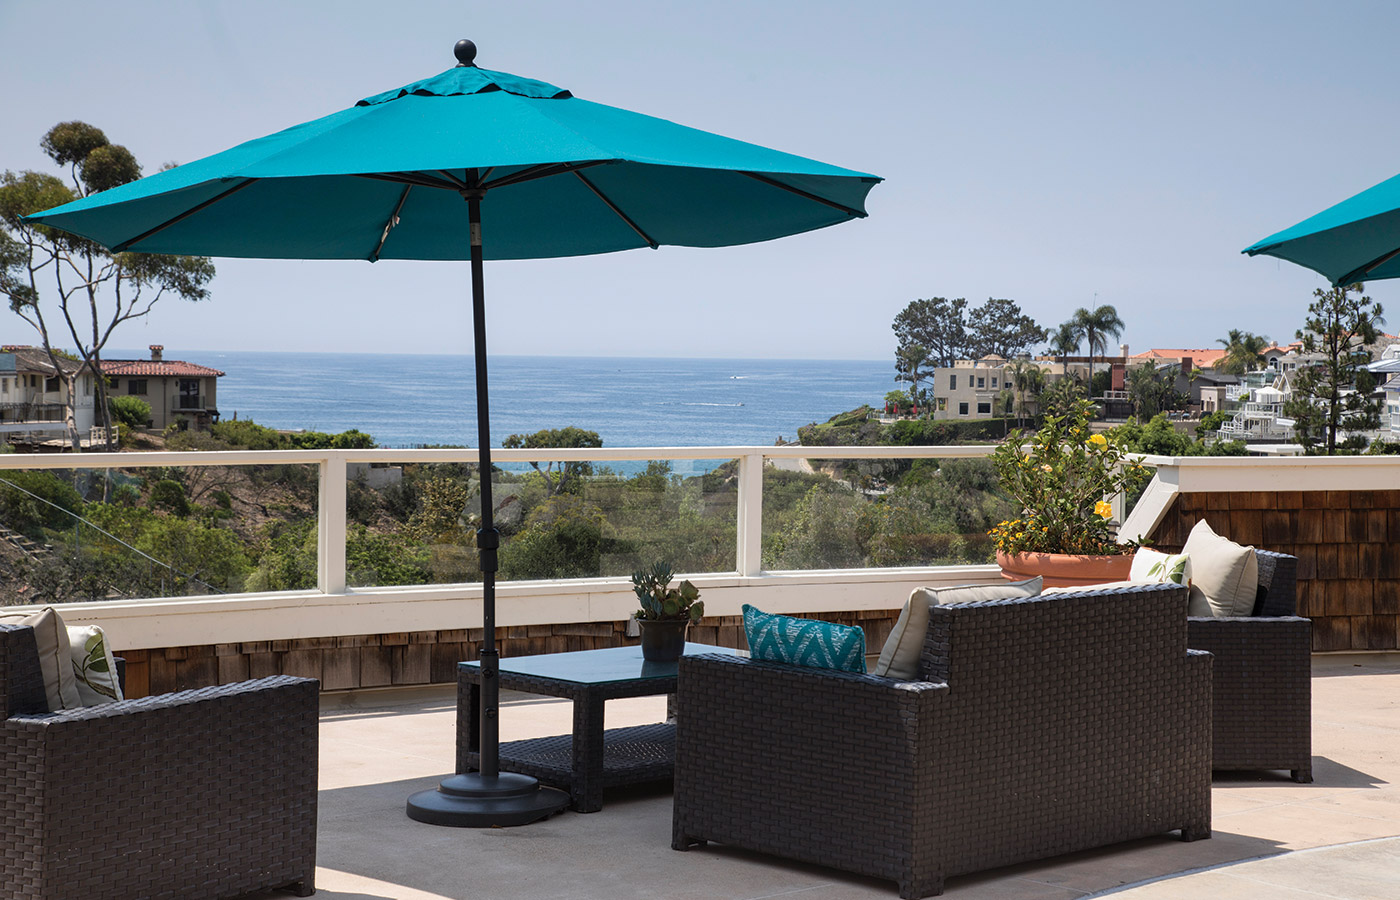 An outdoor seating area with an ocean view at Crown Cove.